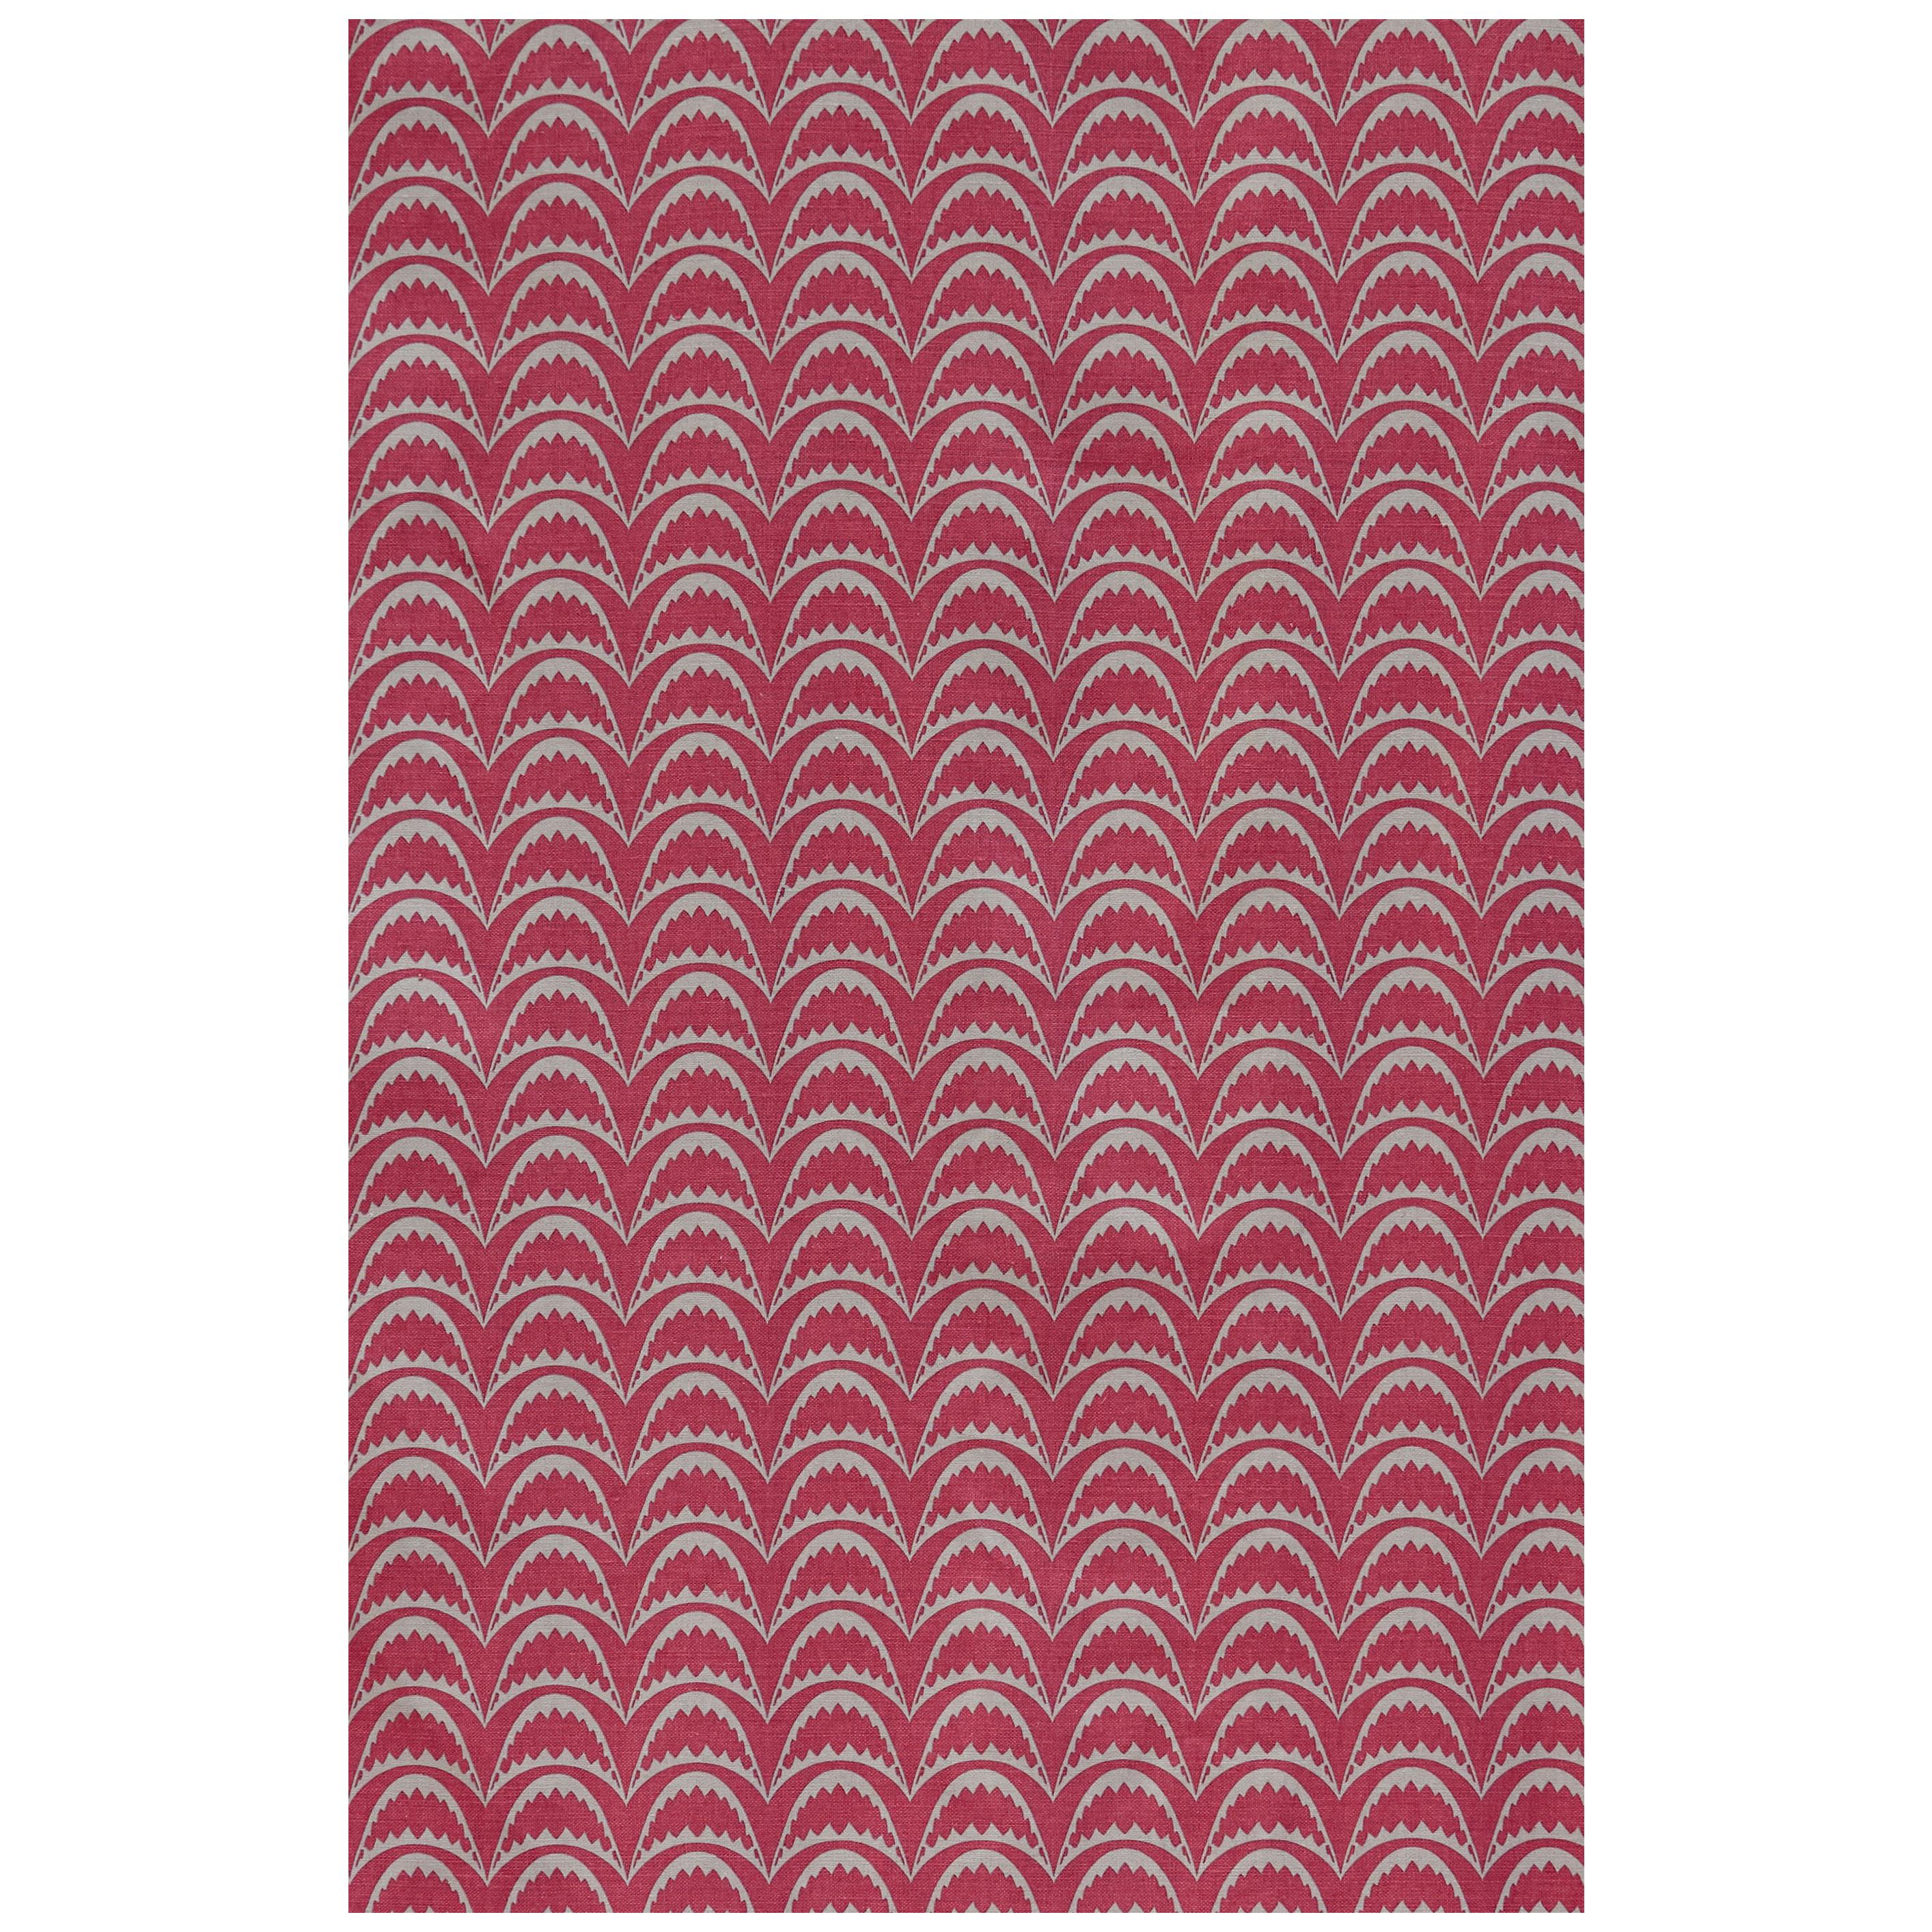 'Arcade' Contemporary, Traditional Fabric in Raspberry For Sale